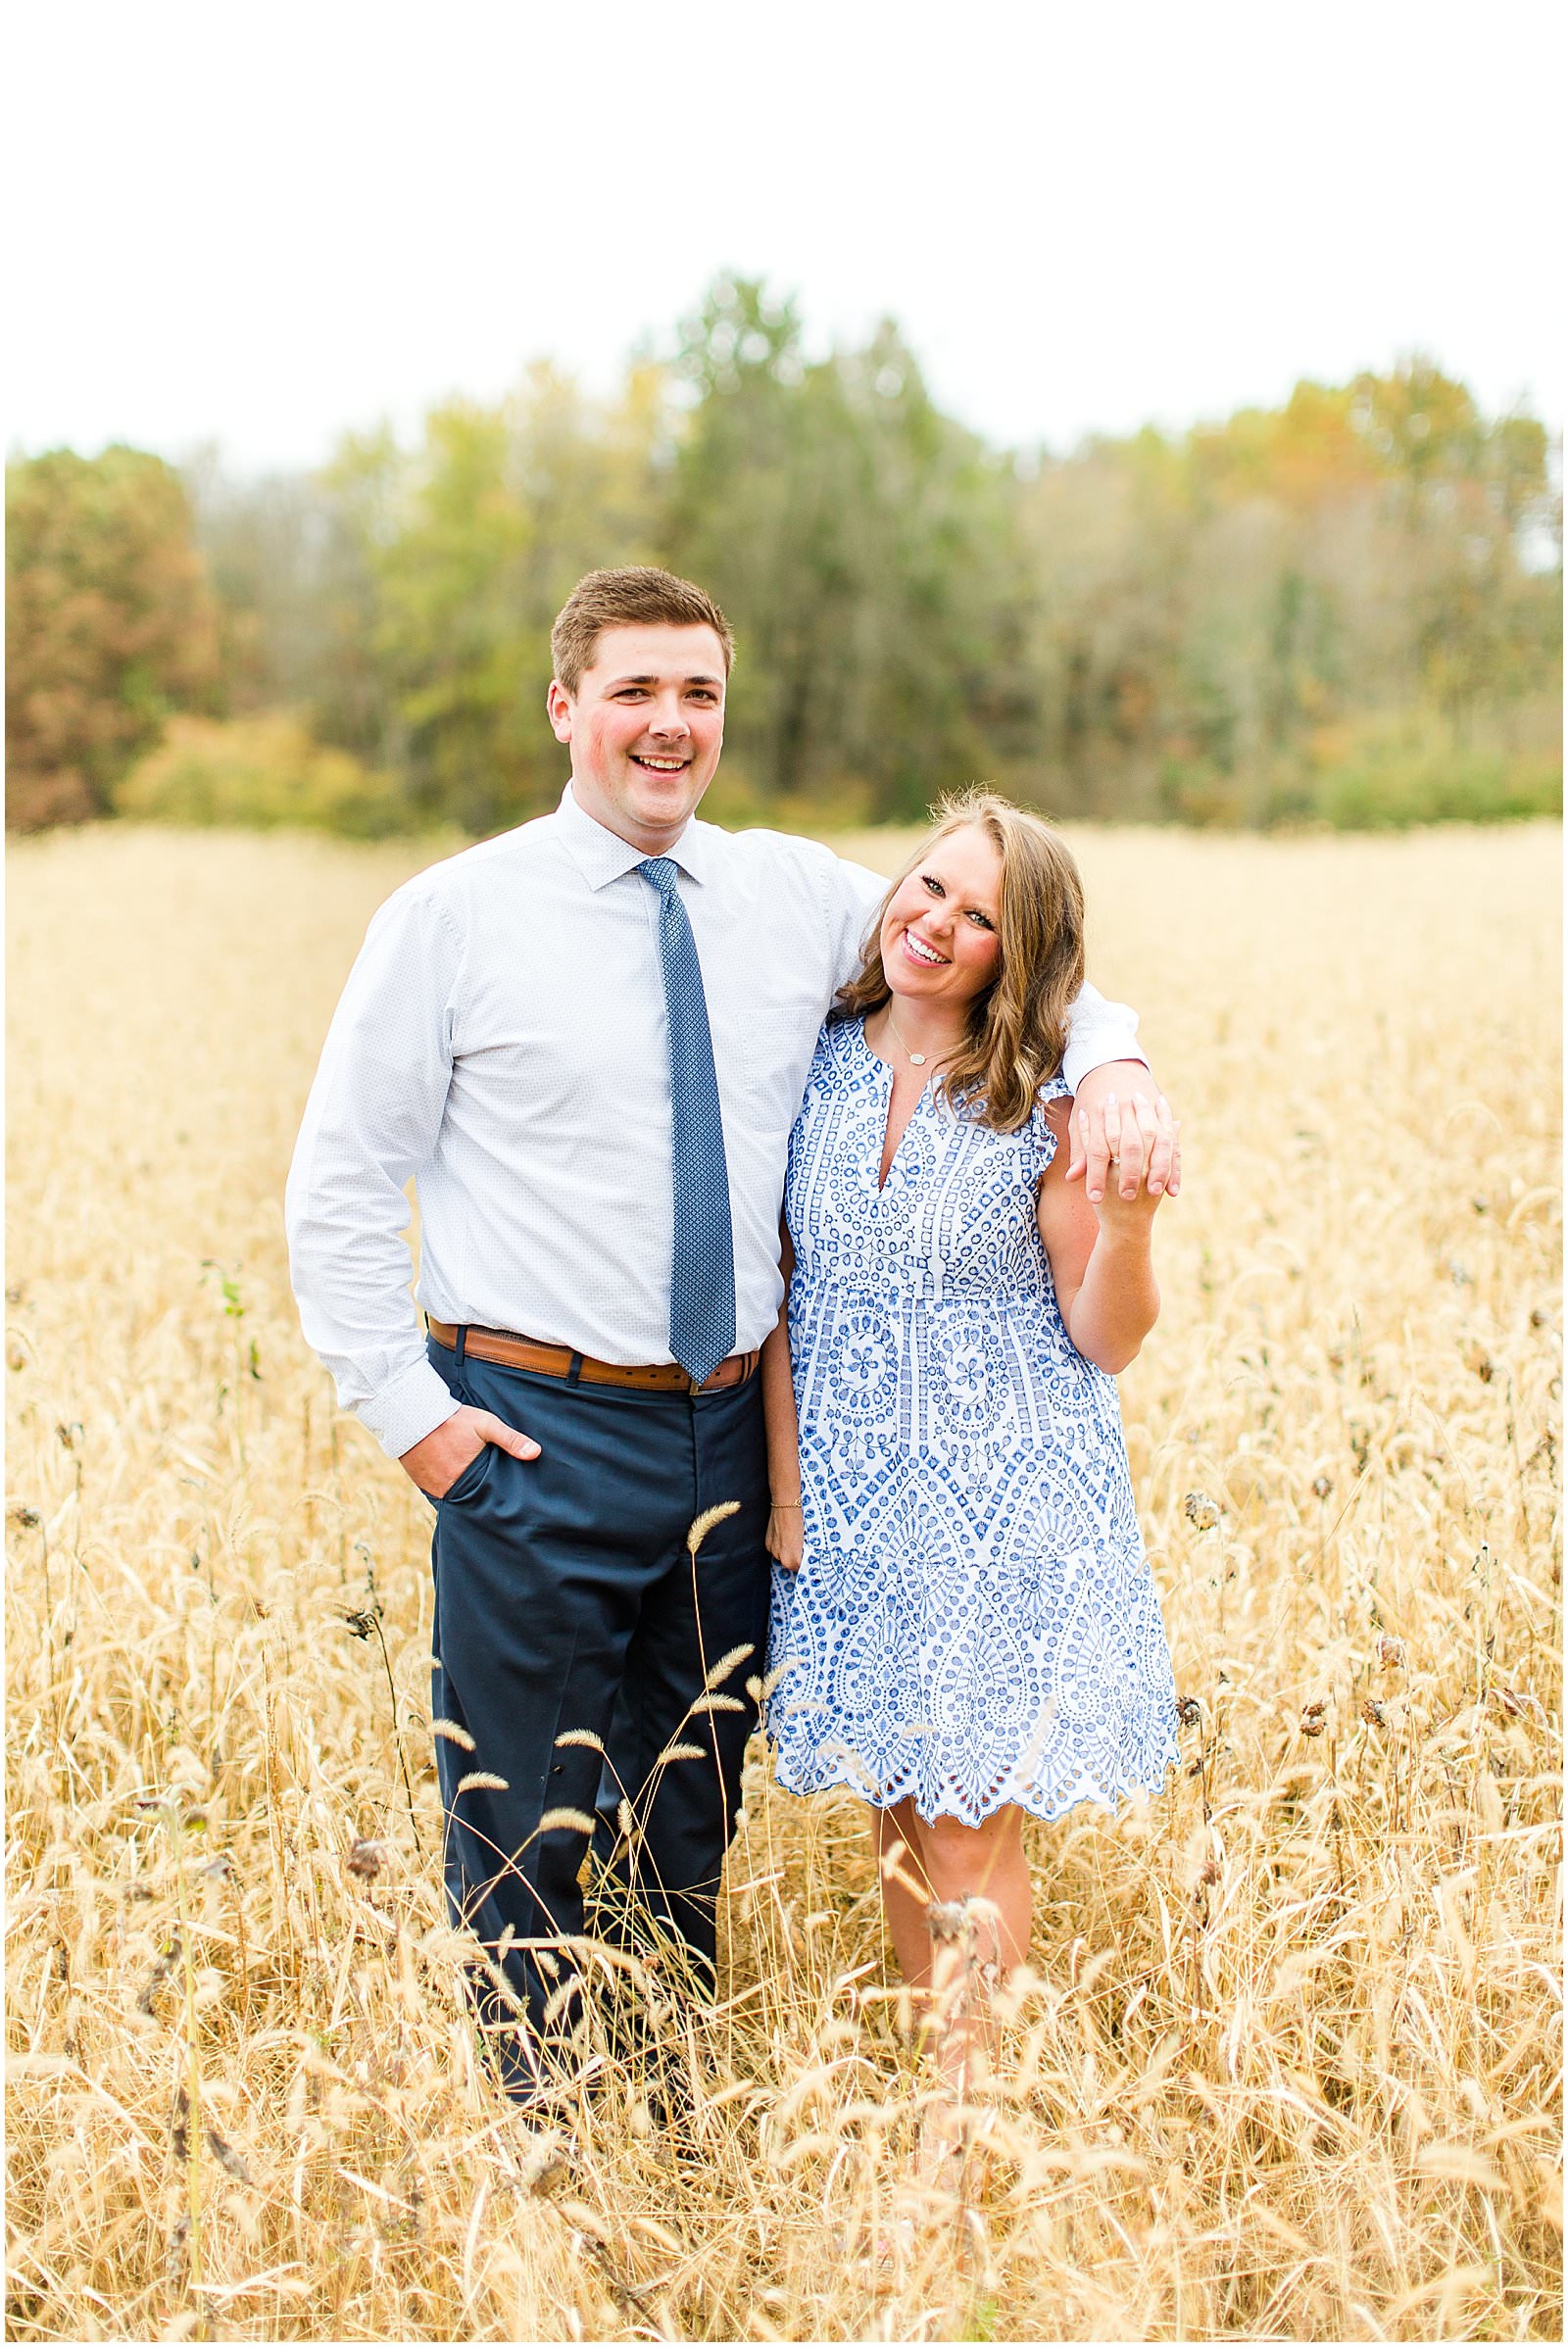 A Southern Illinois Engagement Session | Roxanne and Matthew | Bret and Brandie Photography 0013.jpg